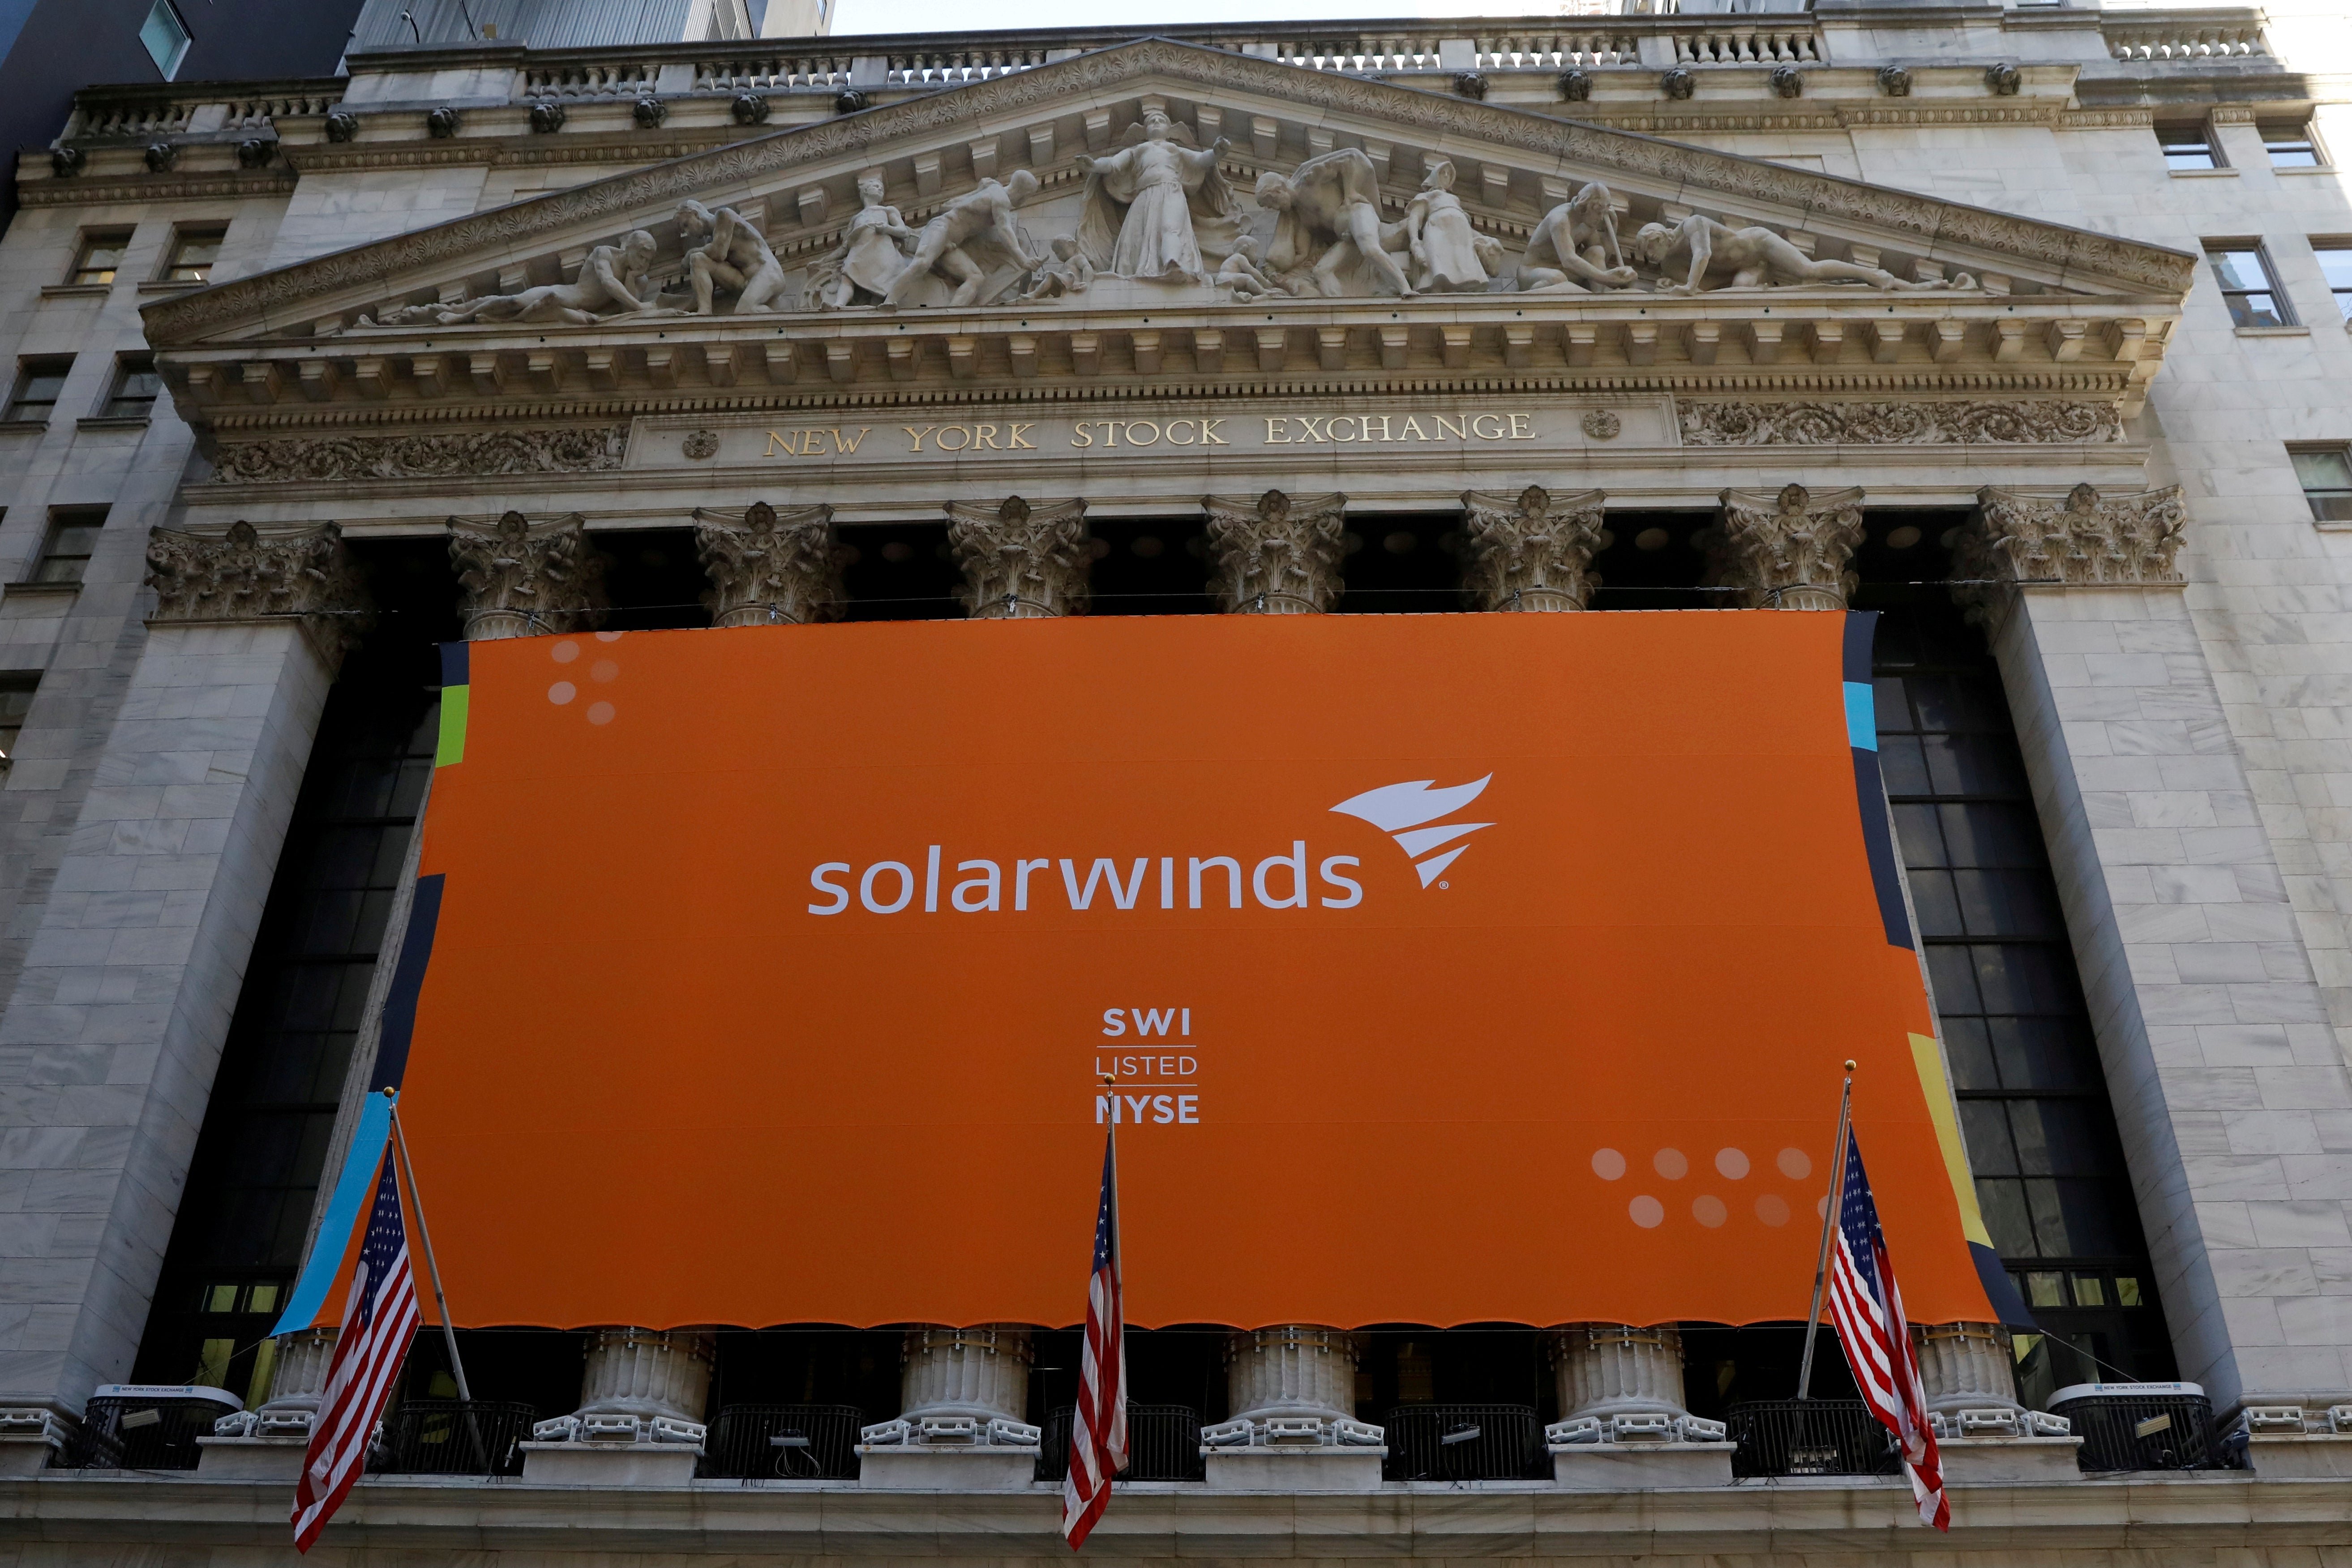 A large orange SolarWinds banner hanging on the front of the New York Stock Exchange building.